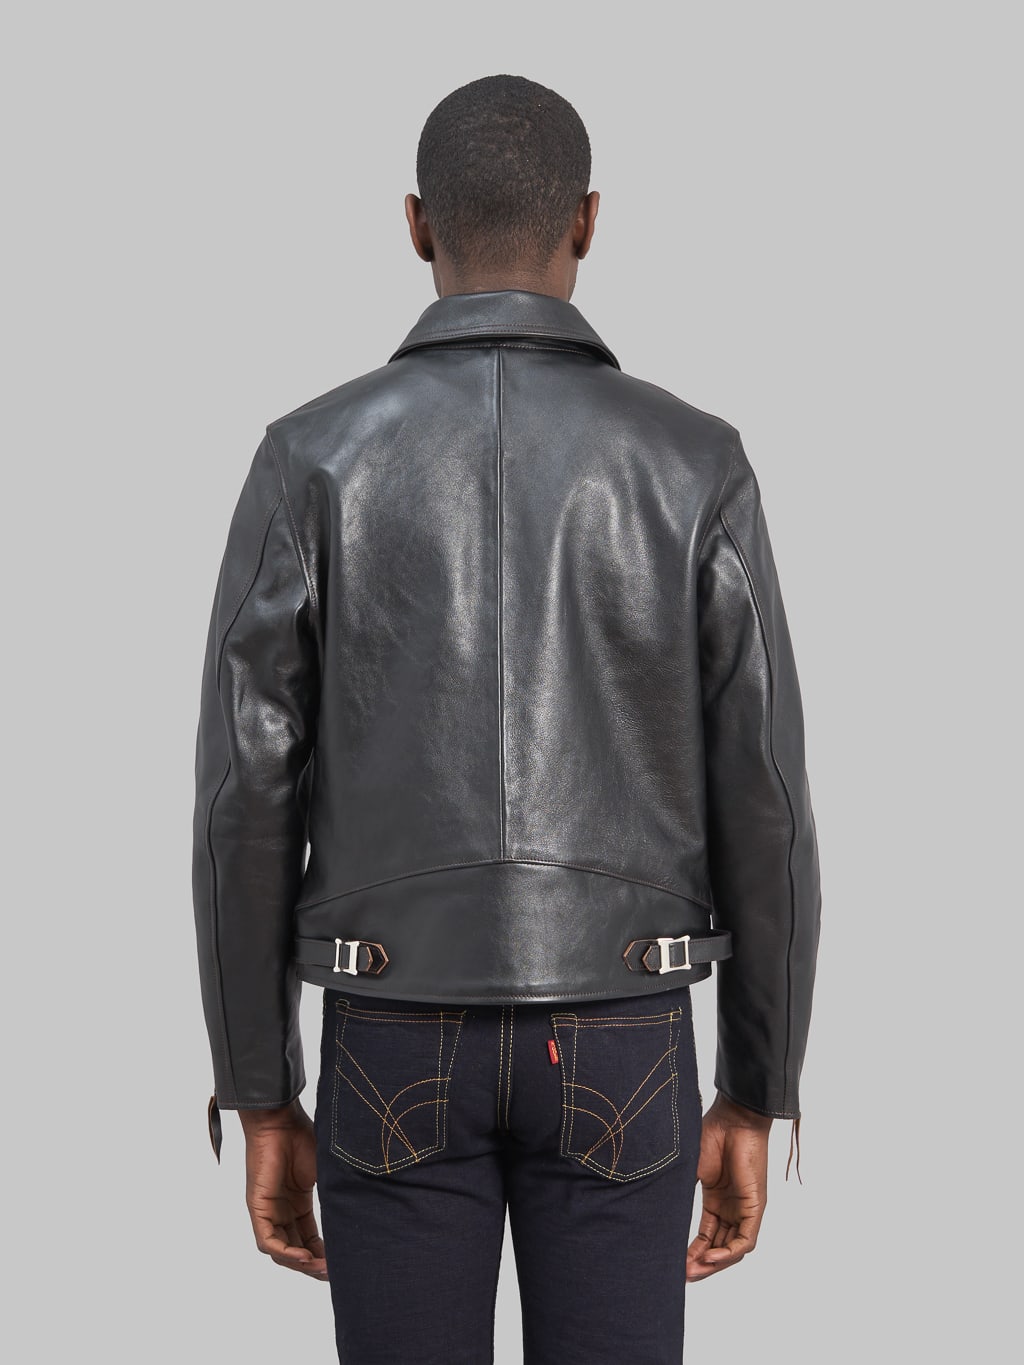 double helix dodecagon riders horsehide jacket black back fit